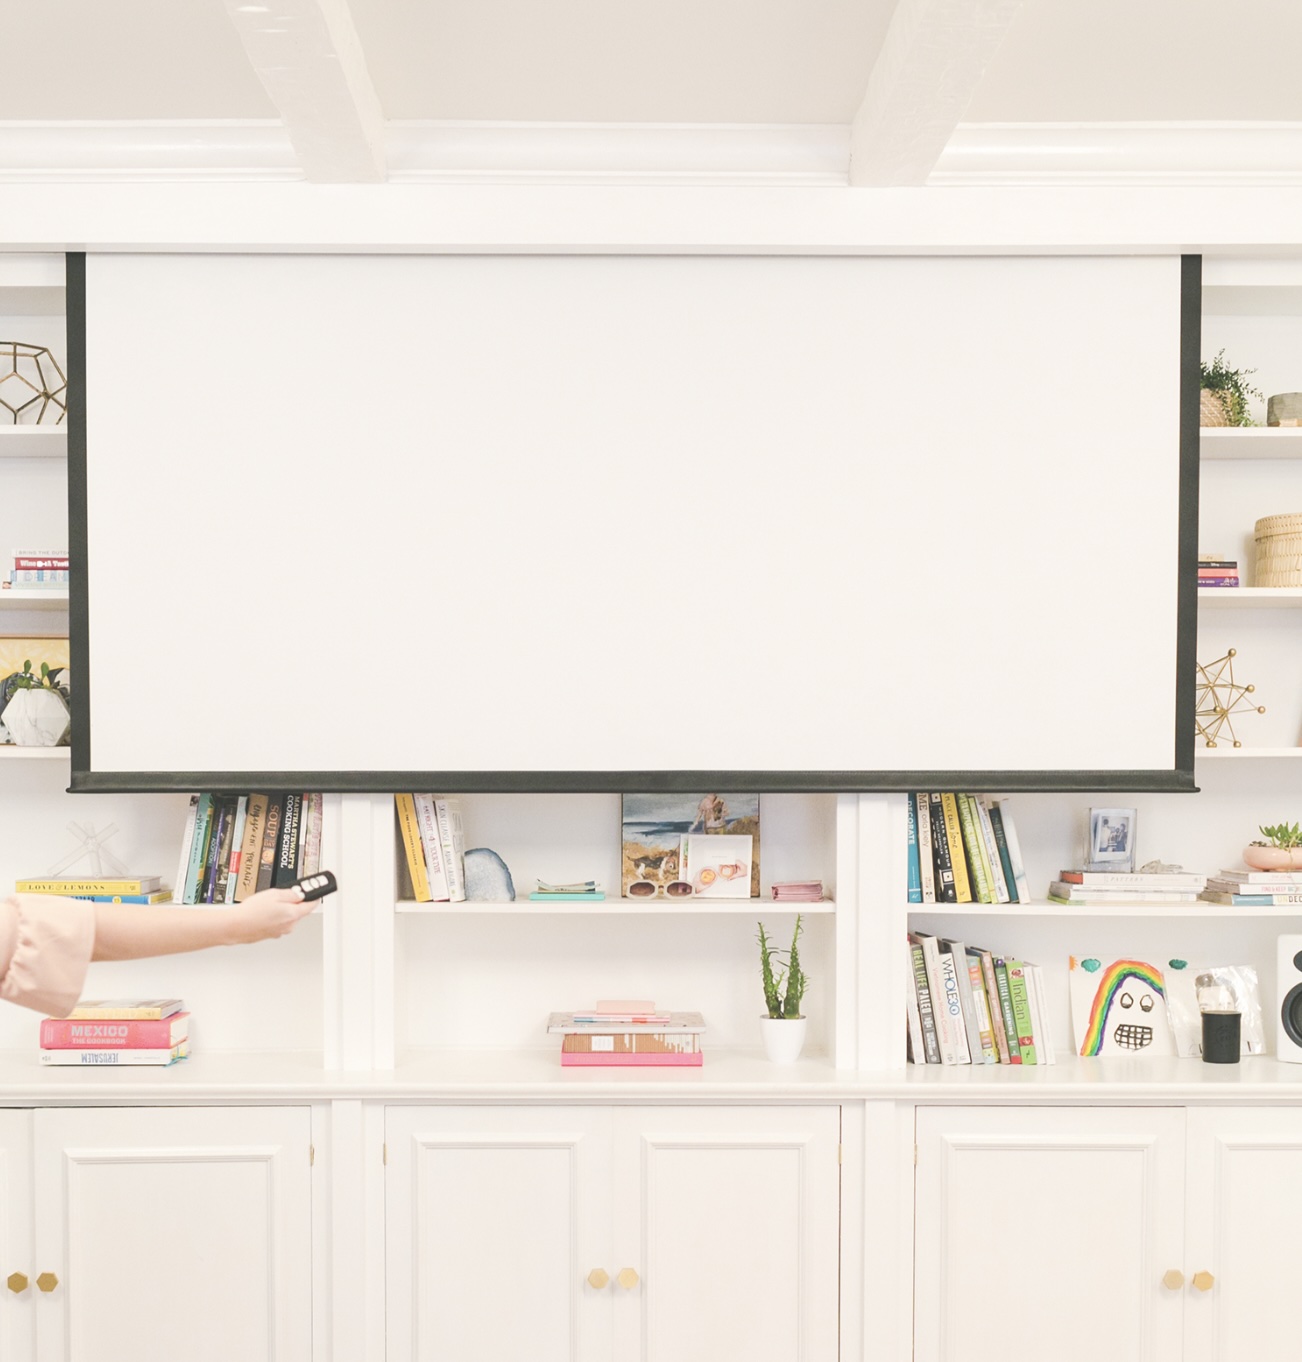 How To Connect TV To A Projector